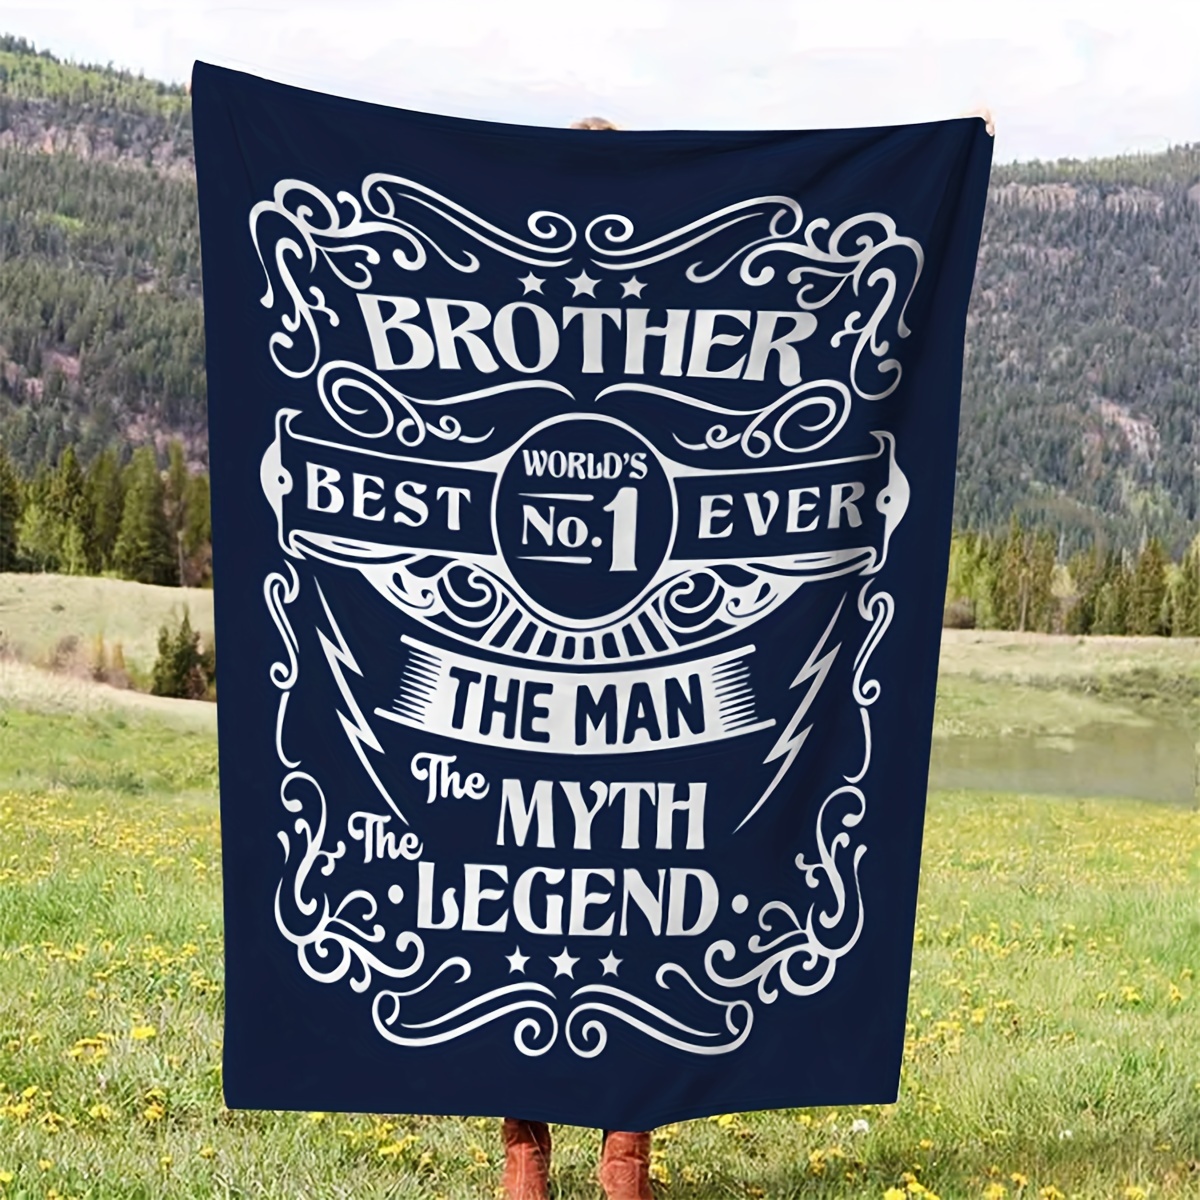 

1pc Creative Text Letter Blanket To Brother Soft Blanket Flannel Blanket For Couch Sofa Office Bed Camping Travel, Multi-purpose Gift Blanket For All Season